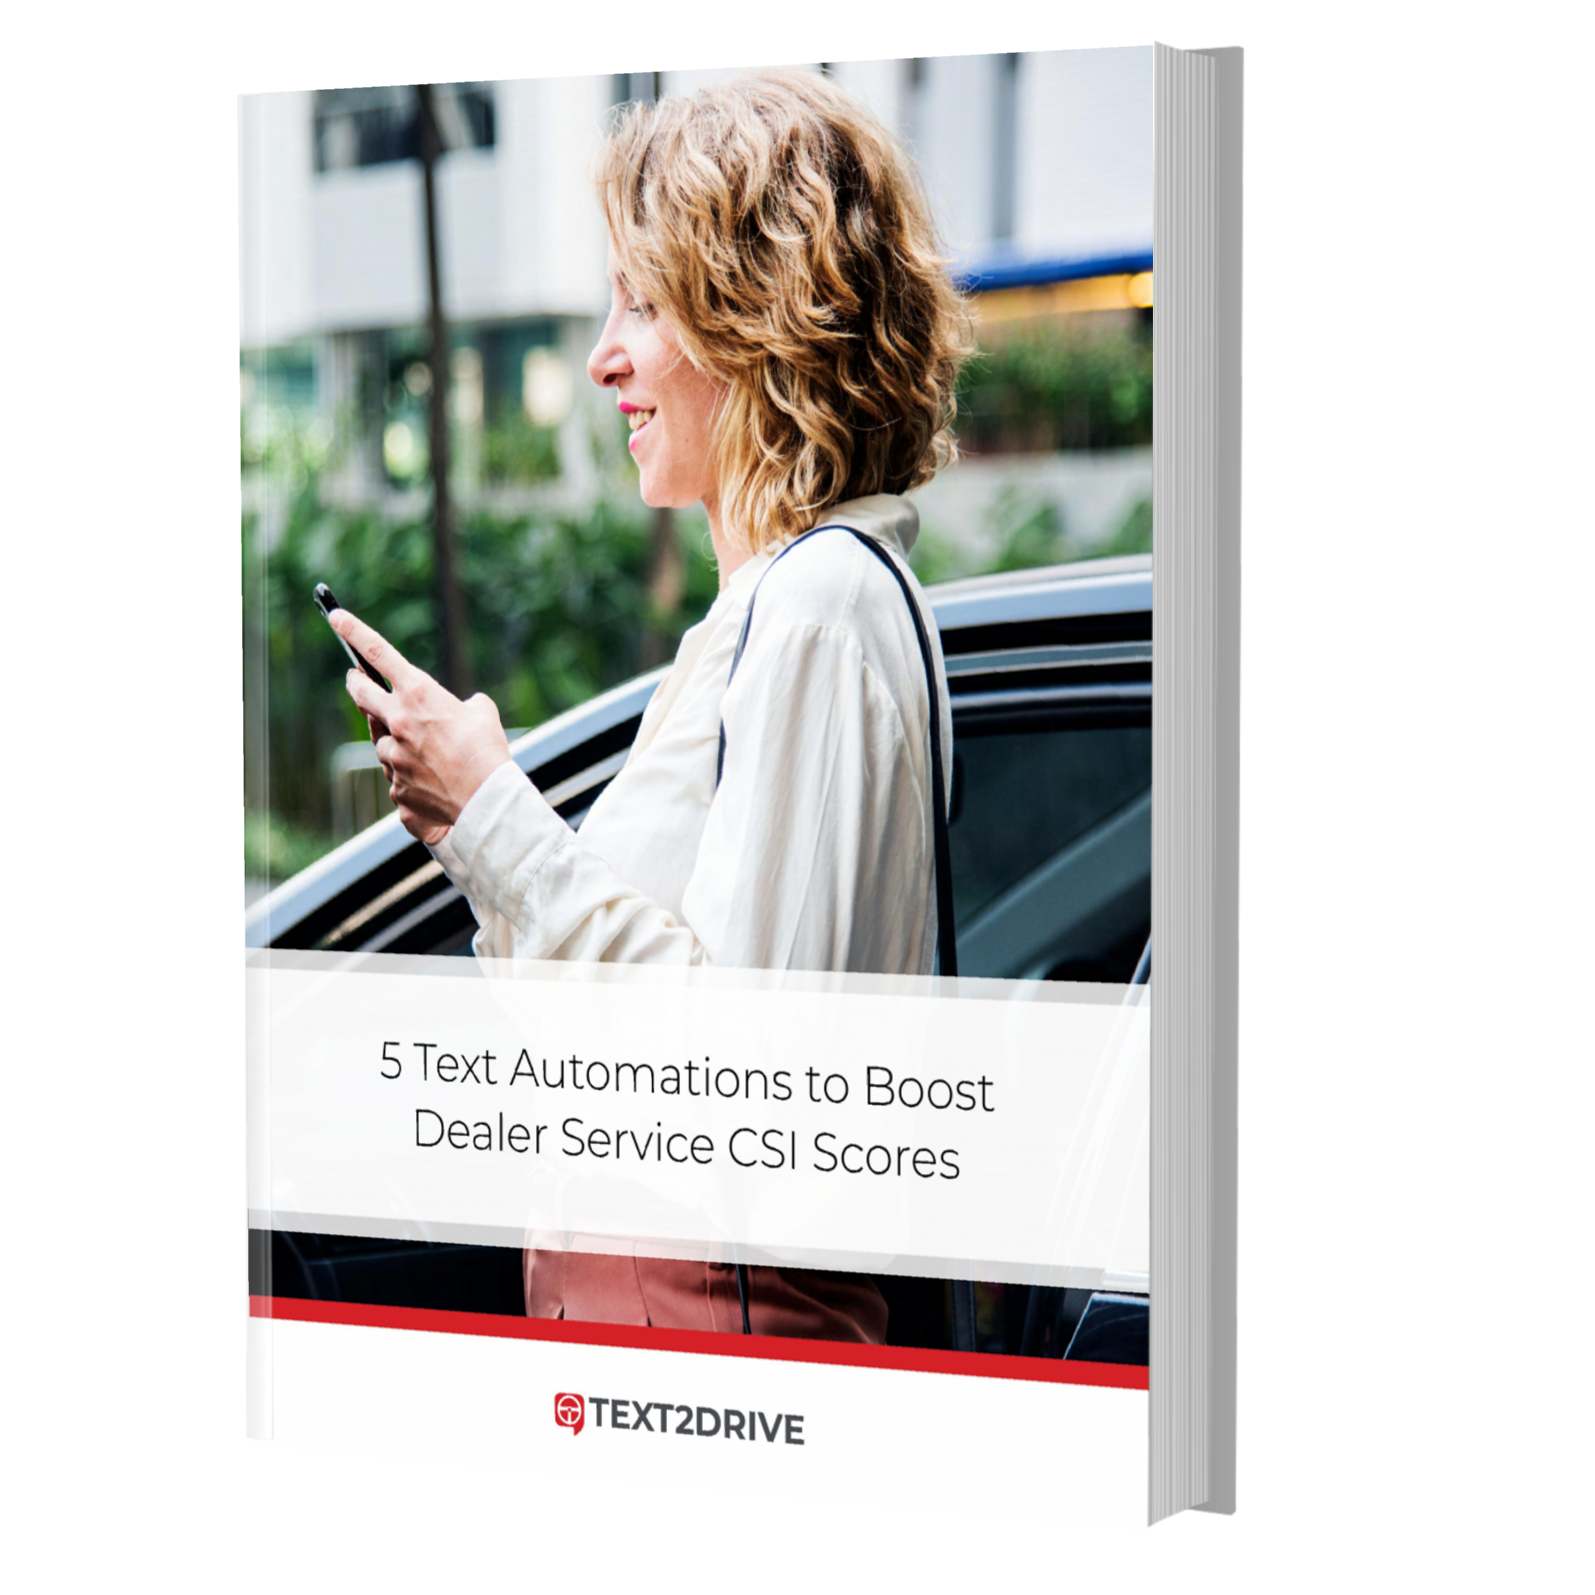 5 Text Automations To Boost Dealer Service CSI Scores By 35% EBook